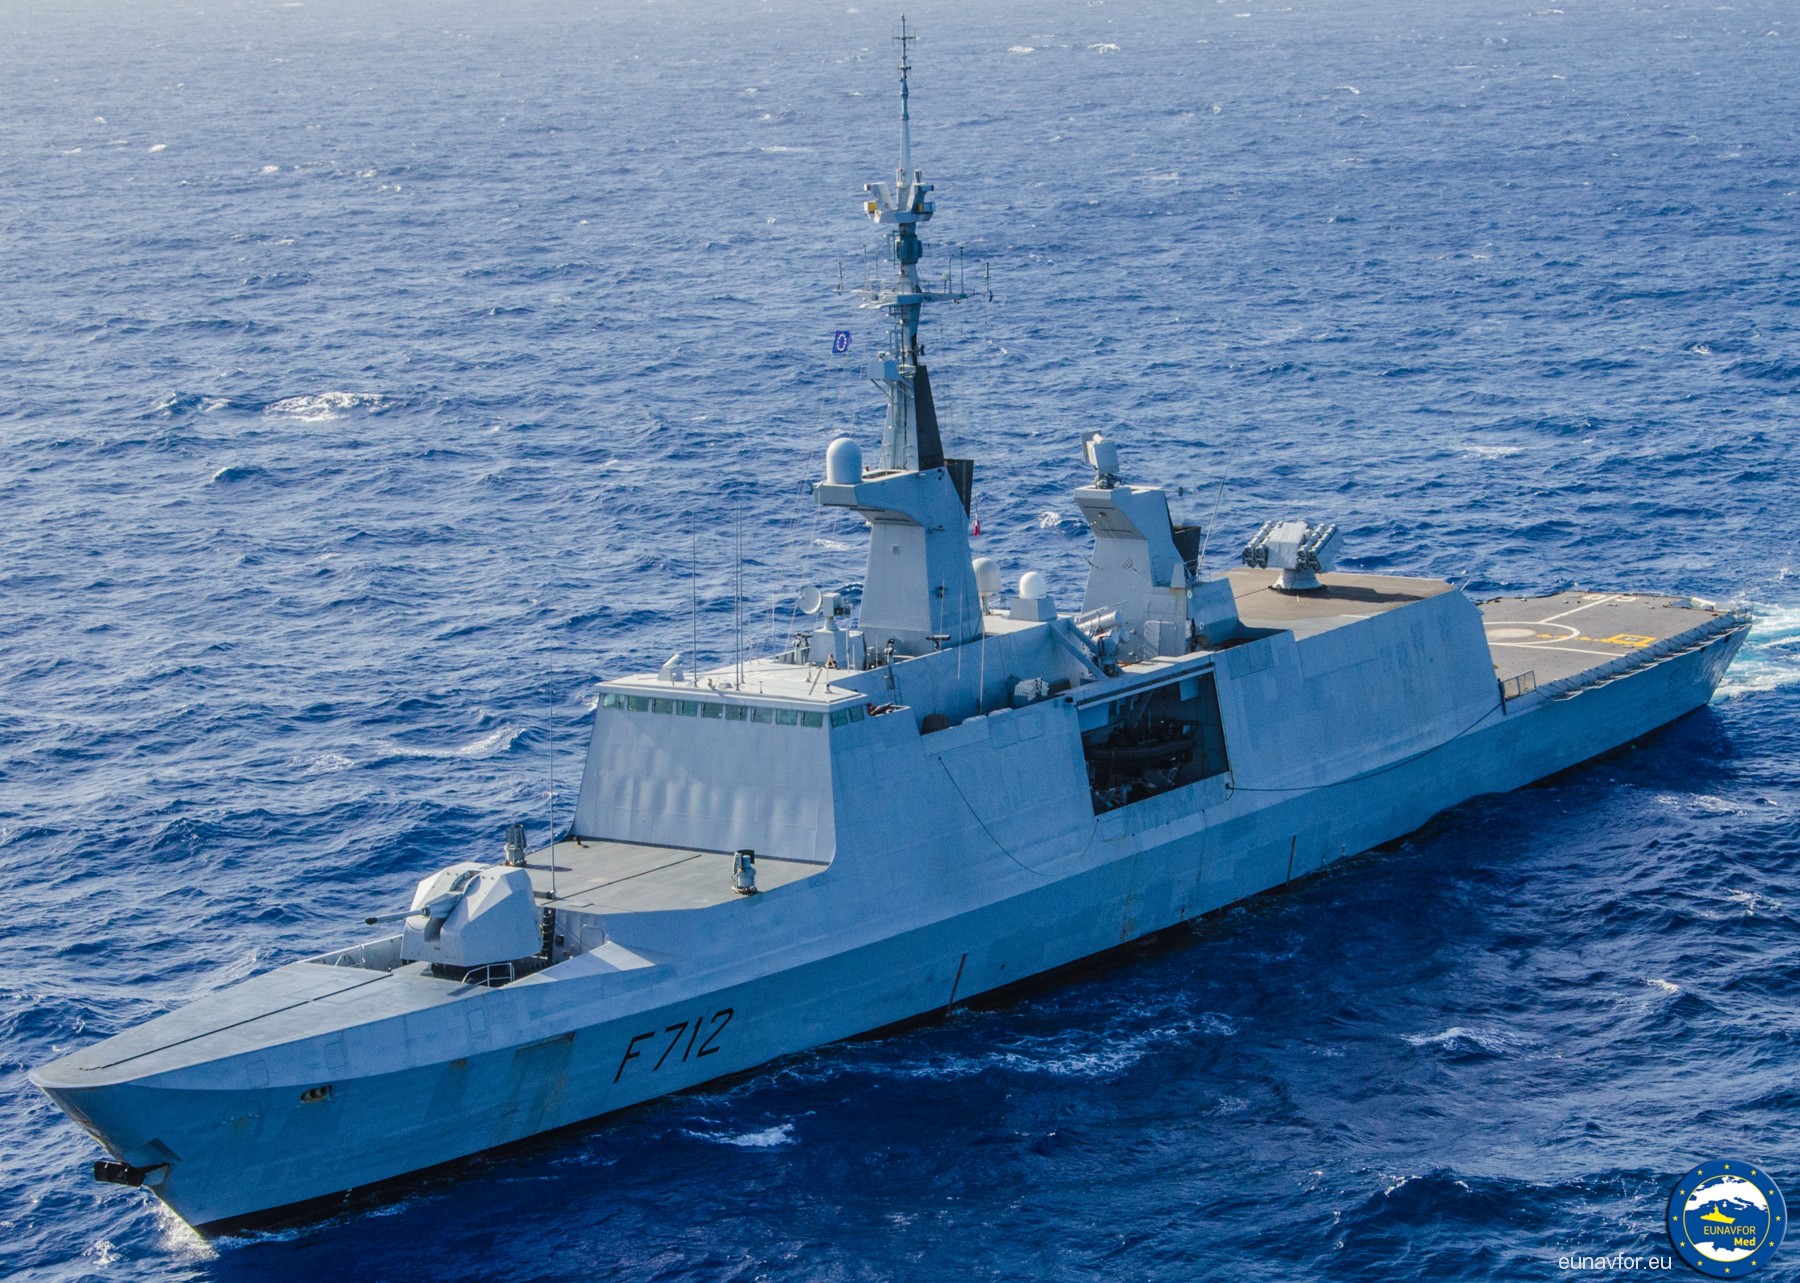 f-712 fs courbet la fayette class frigate french navy marine nationale stealth 03 eunavfor med